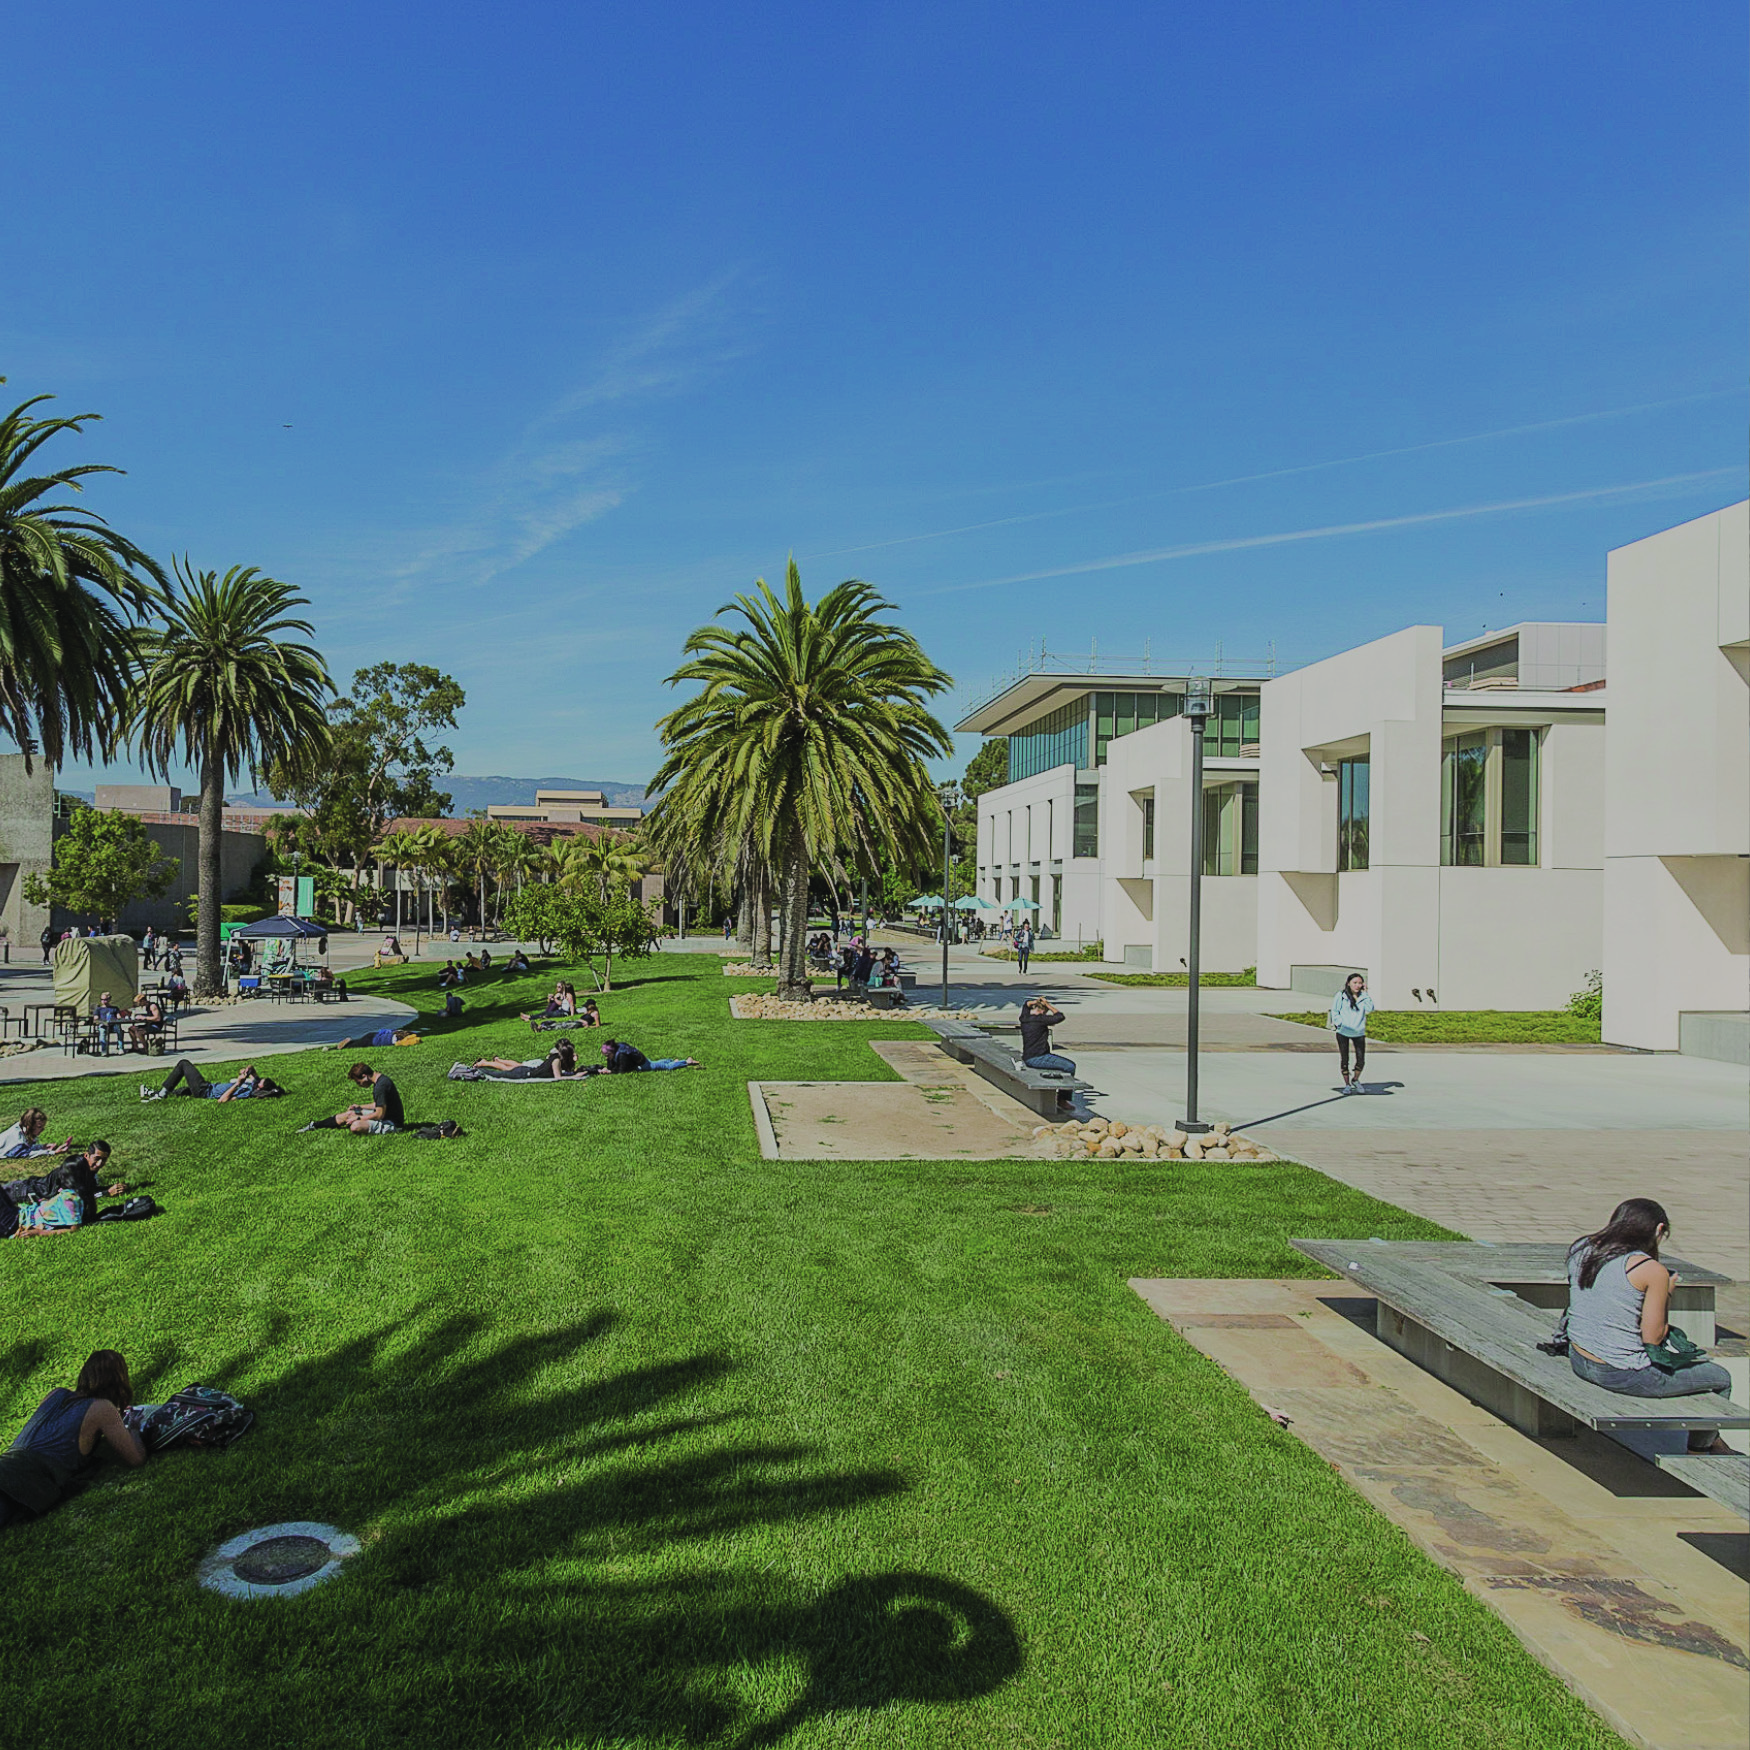 photo of UCSB campus